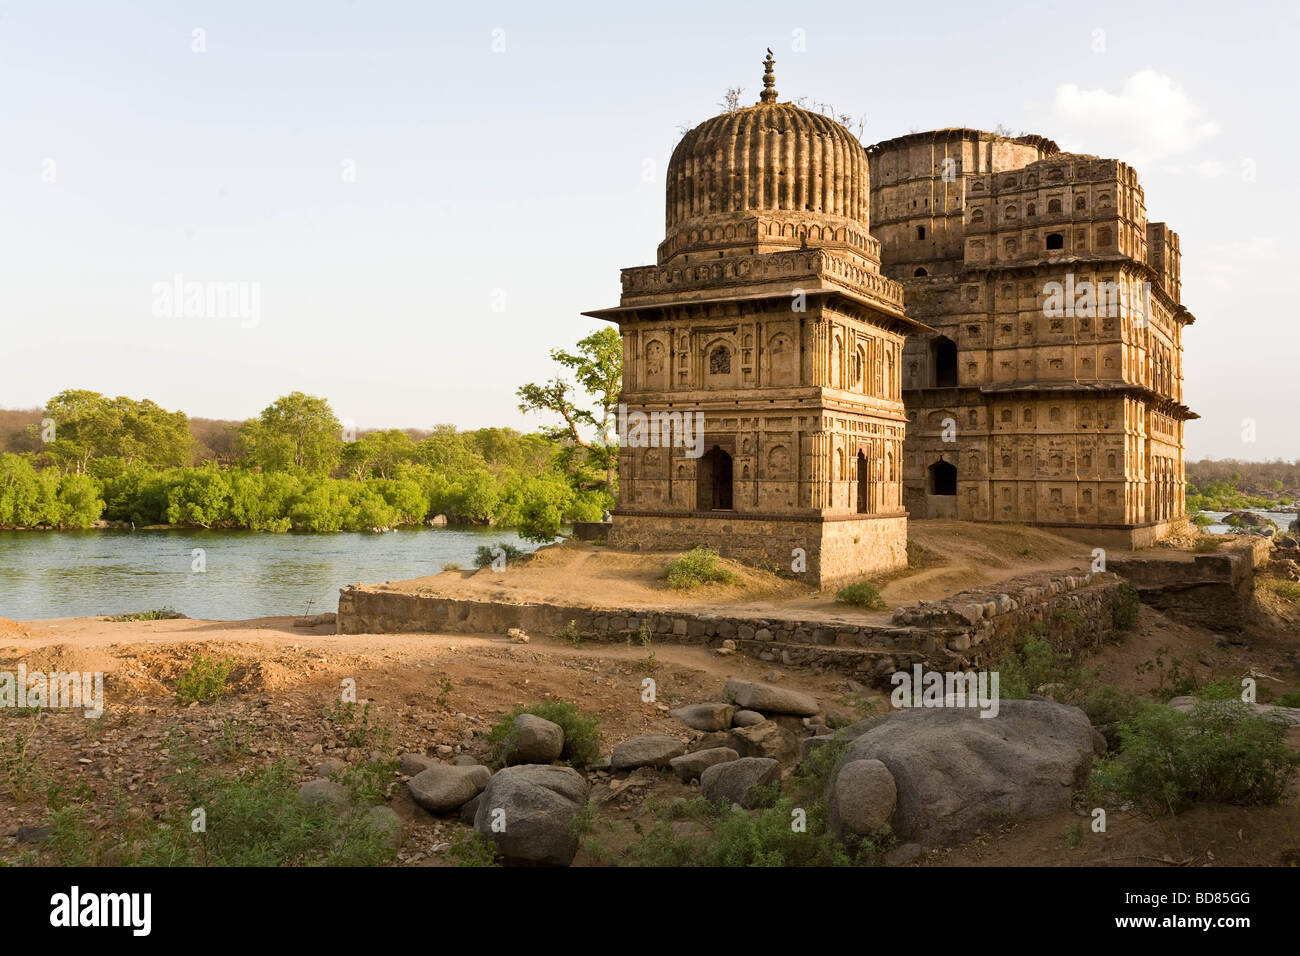 A domed temple/mausoleum on the riverbank at Orchha Stock Photo